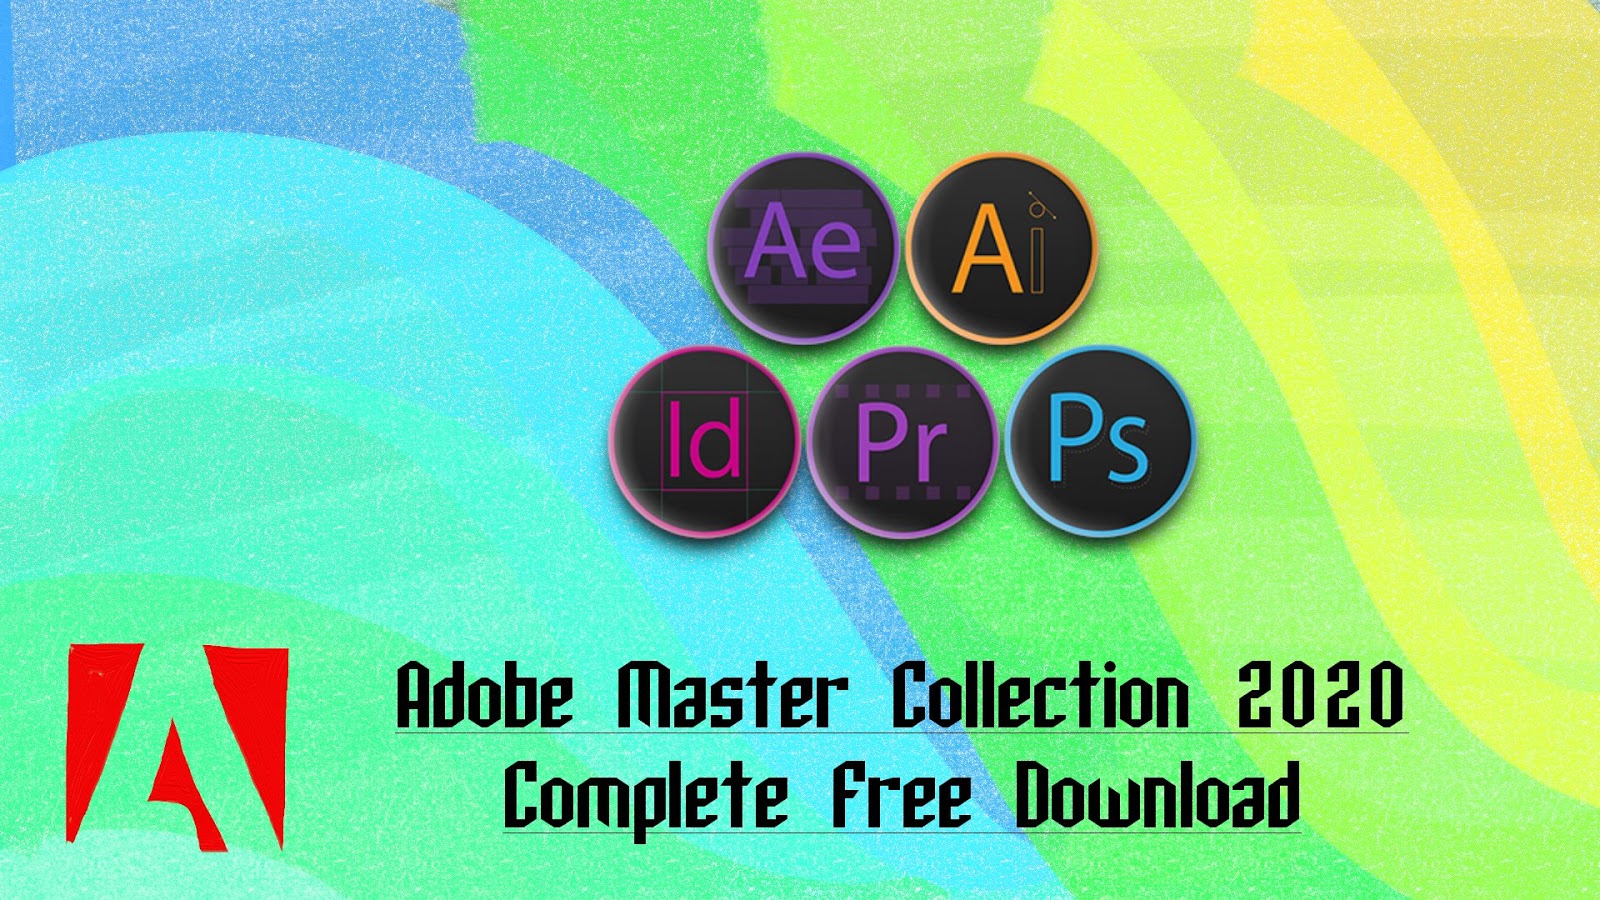 adobe creative suite 6 master collection dvd cover